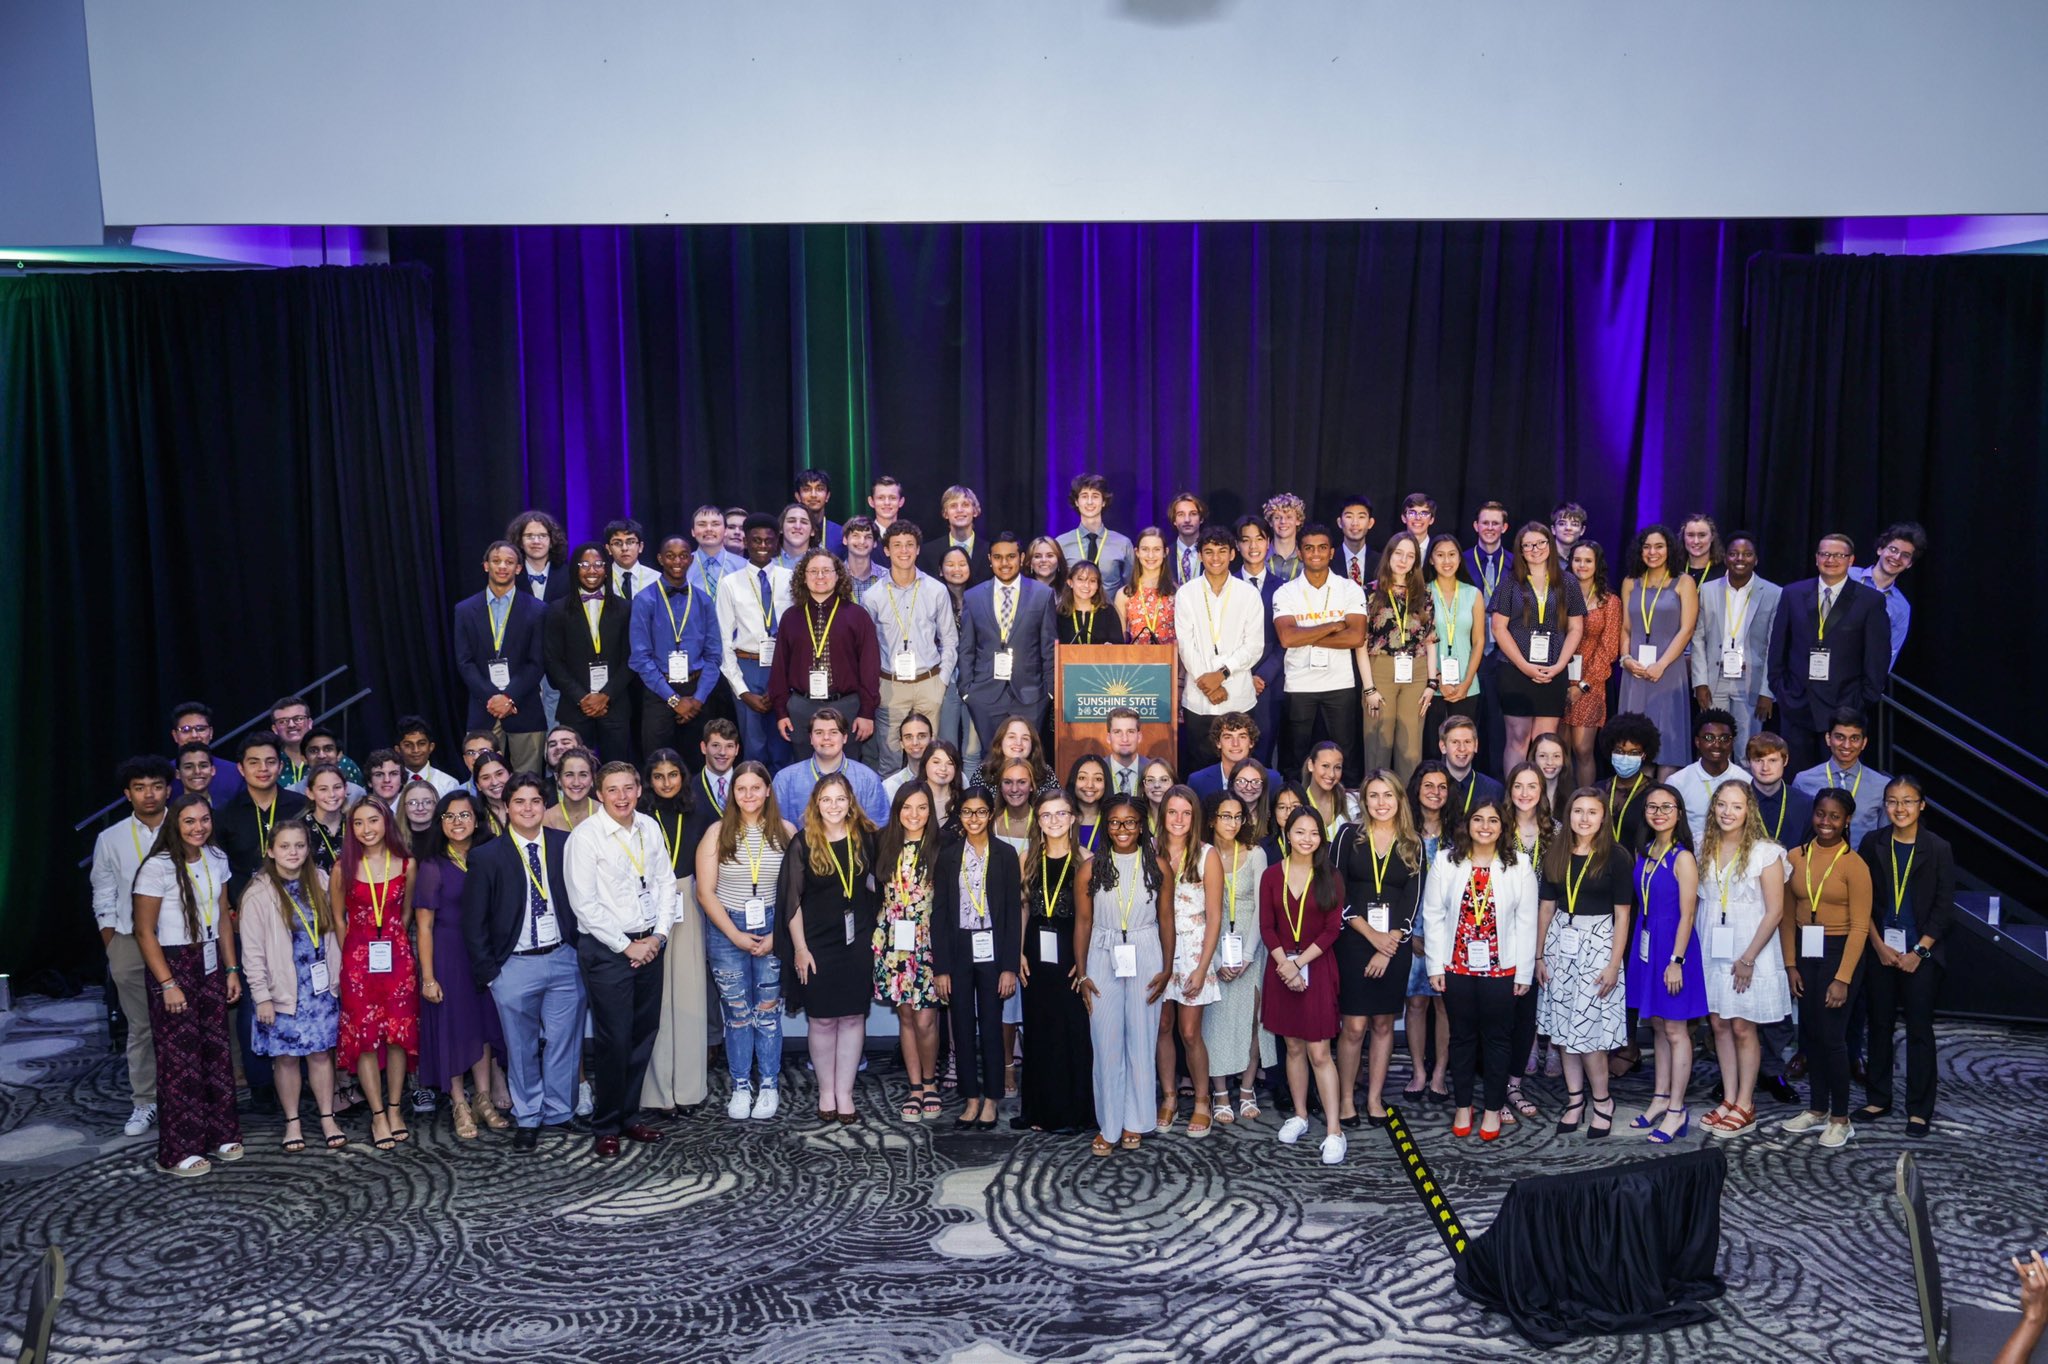 Last month, 100 of the 2021 Sunshine State Scholars gathered in Orlando to be recognized as Florida's top students in STEM!